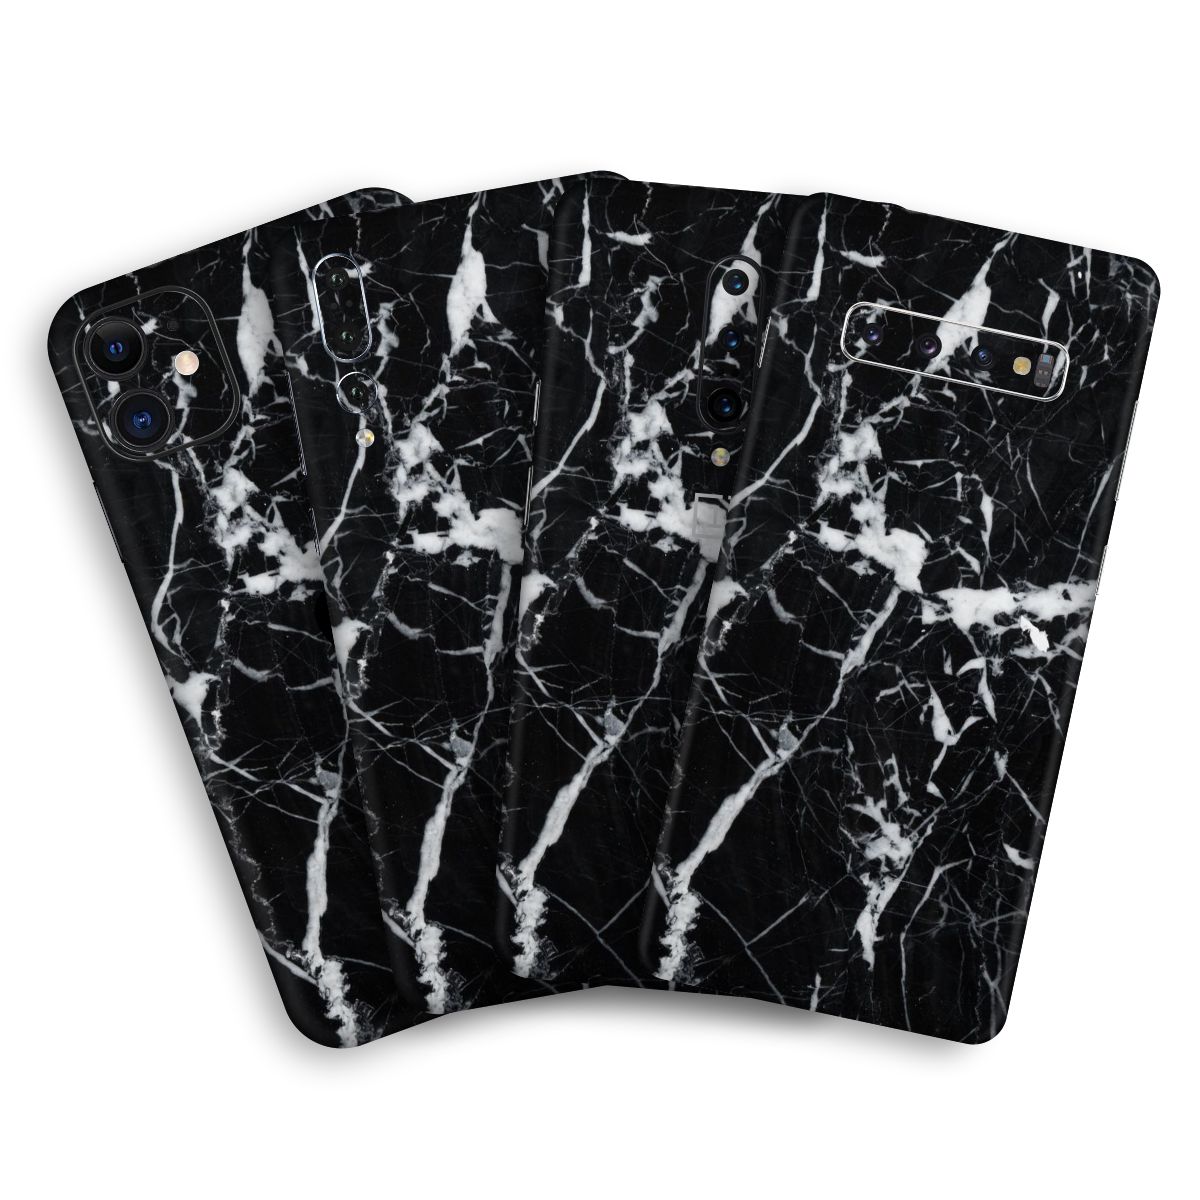 Black Marble Mobile Skin / Mobile Wrap for Samsung Galaxy S Duos